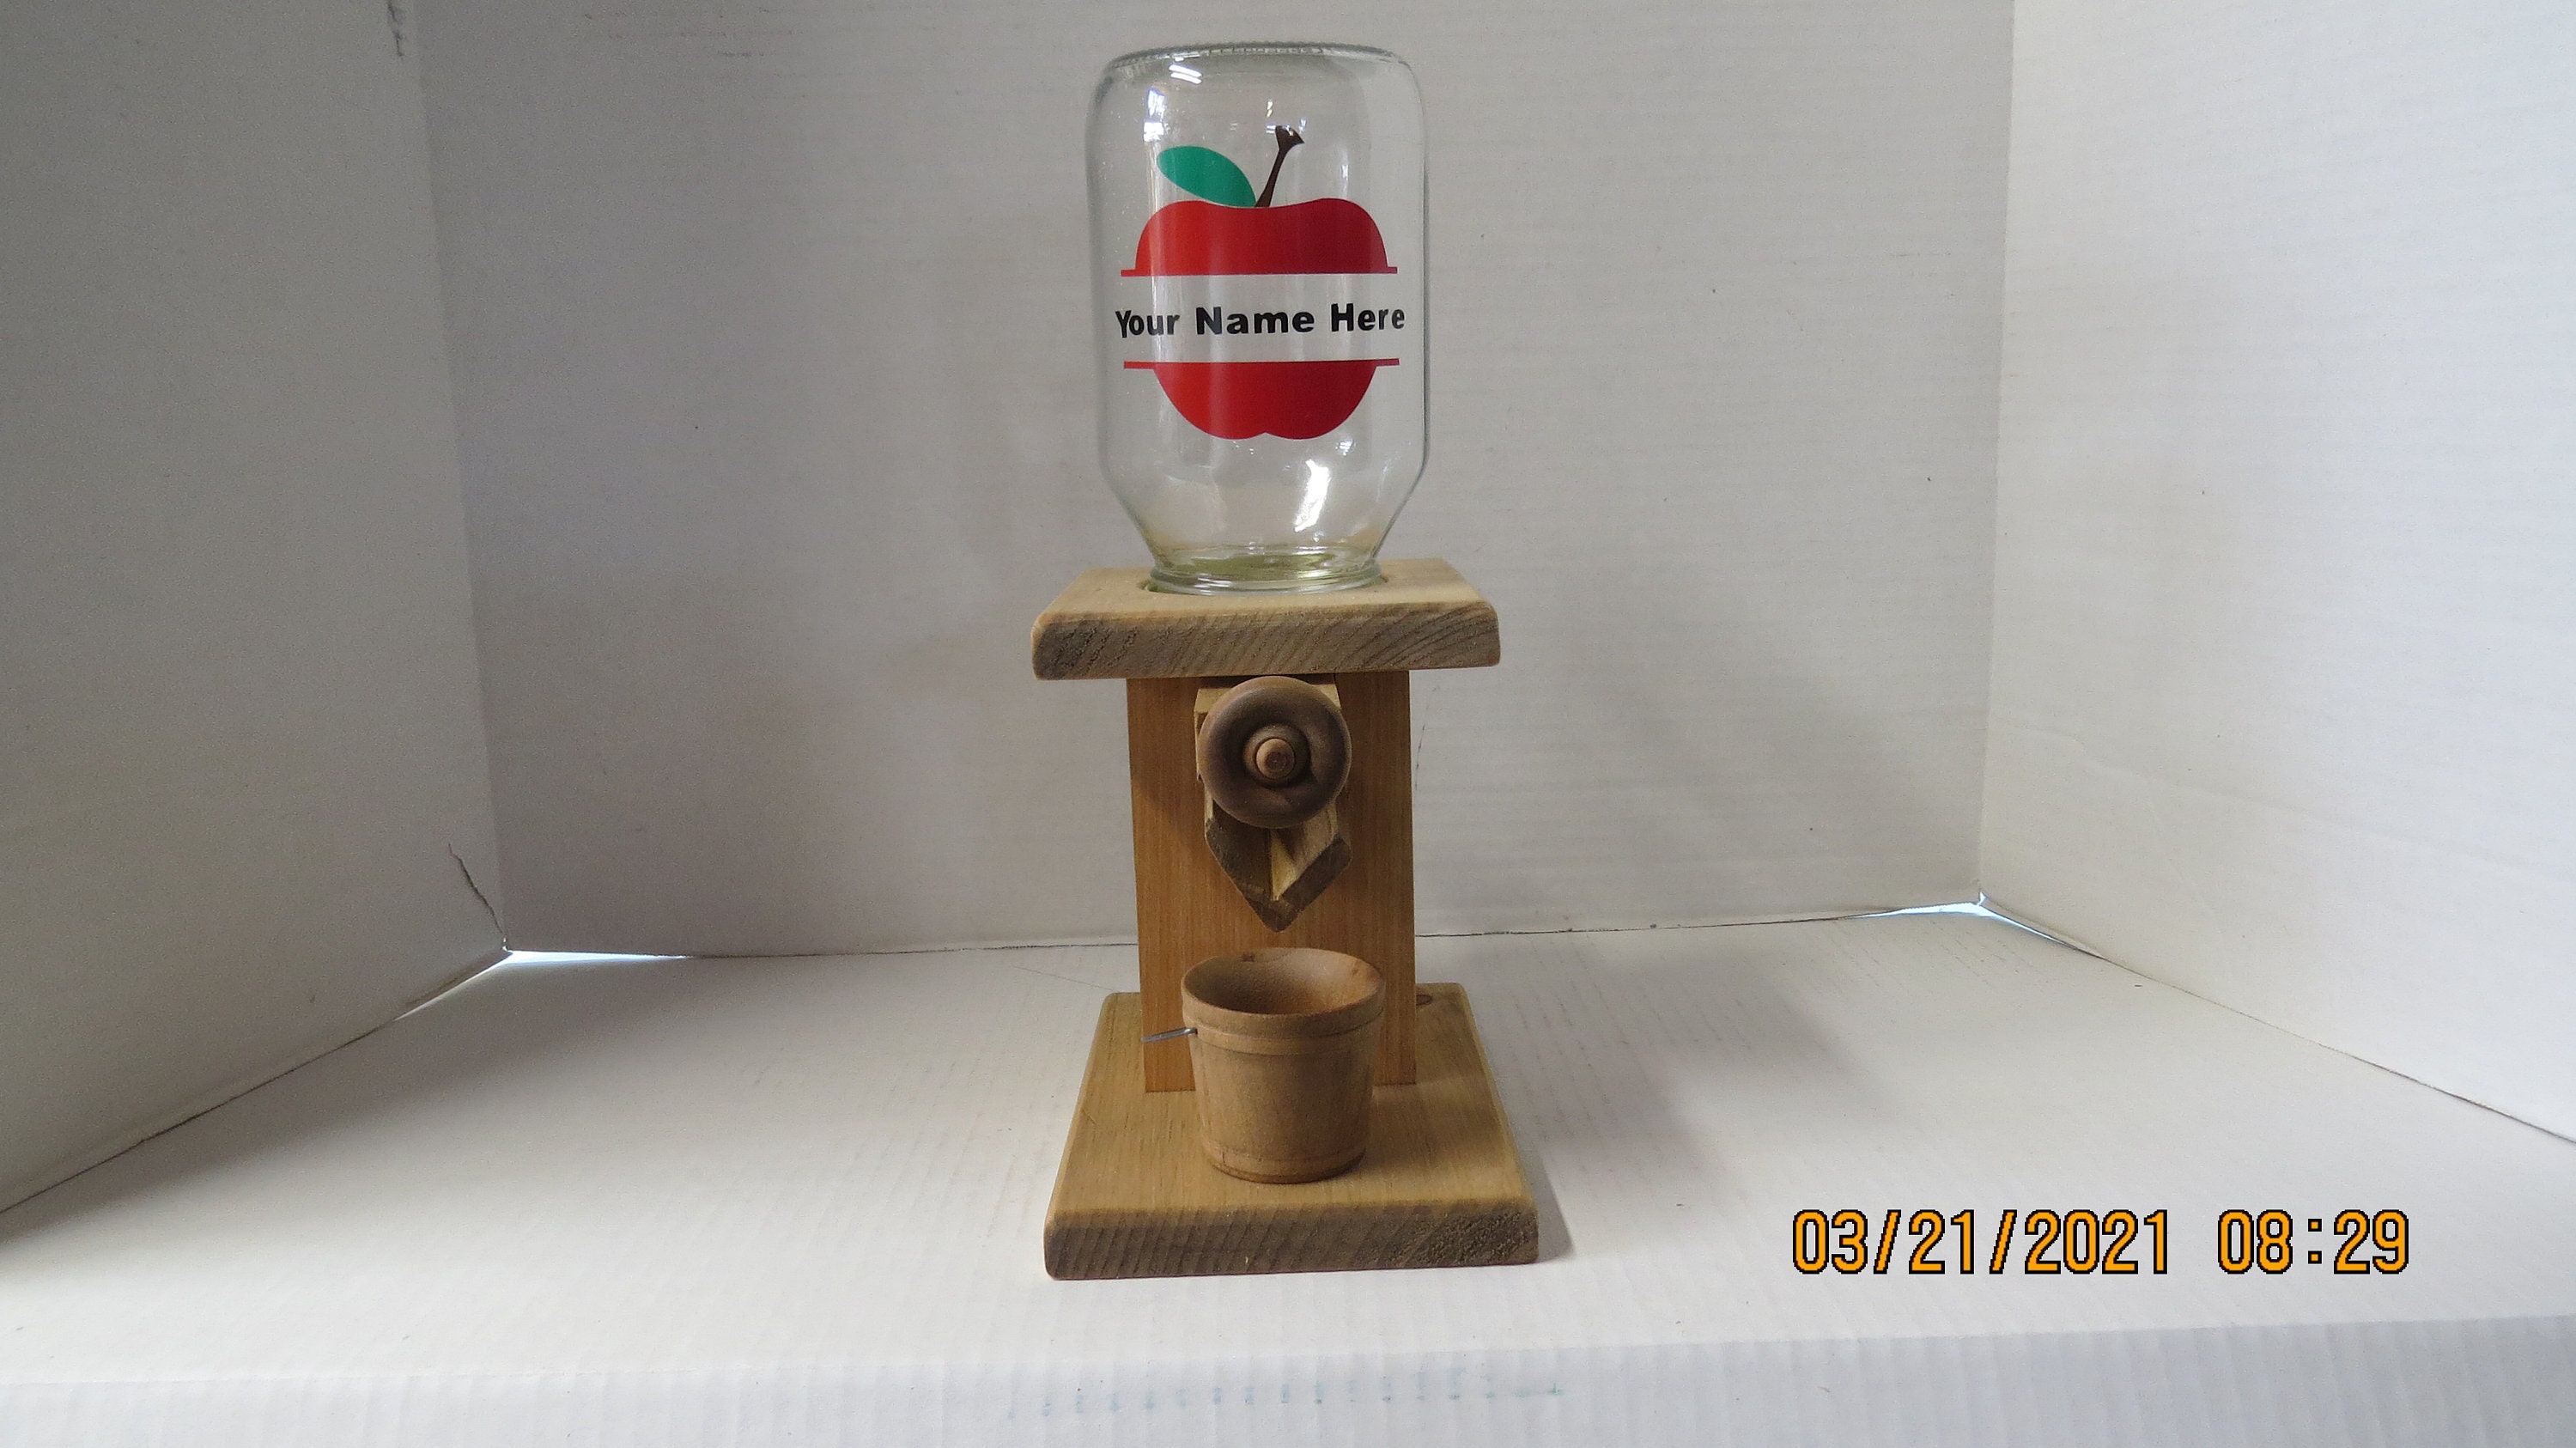 Vintage Handmade Wooden Gumball/ Candy Machine Nut Dispenser The Candy Man